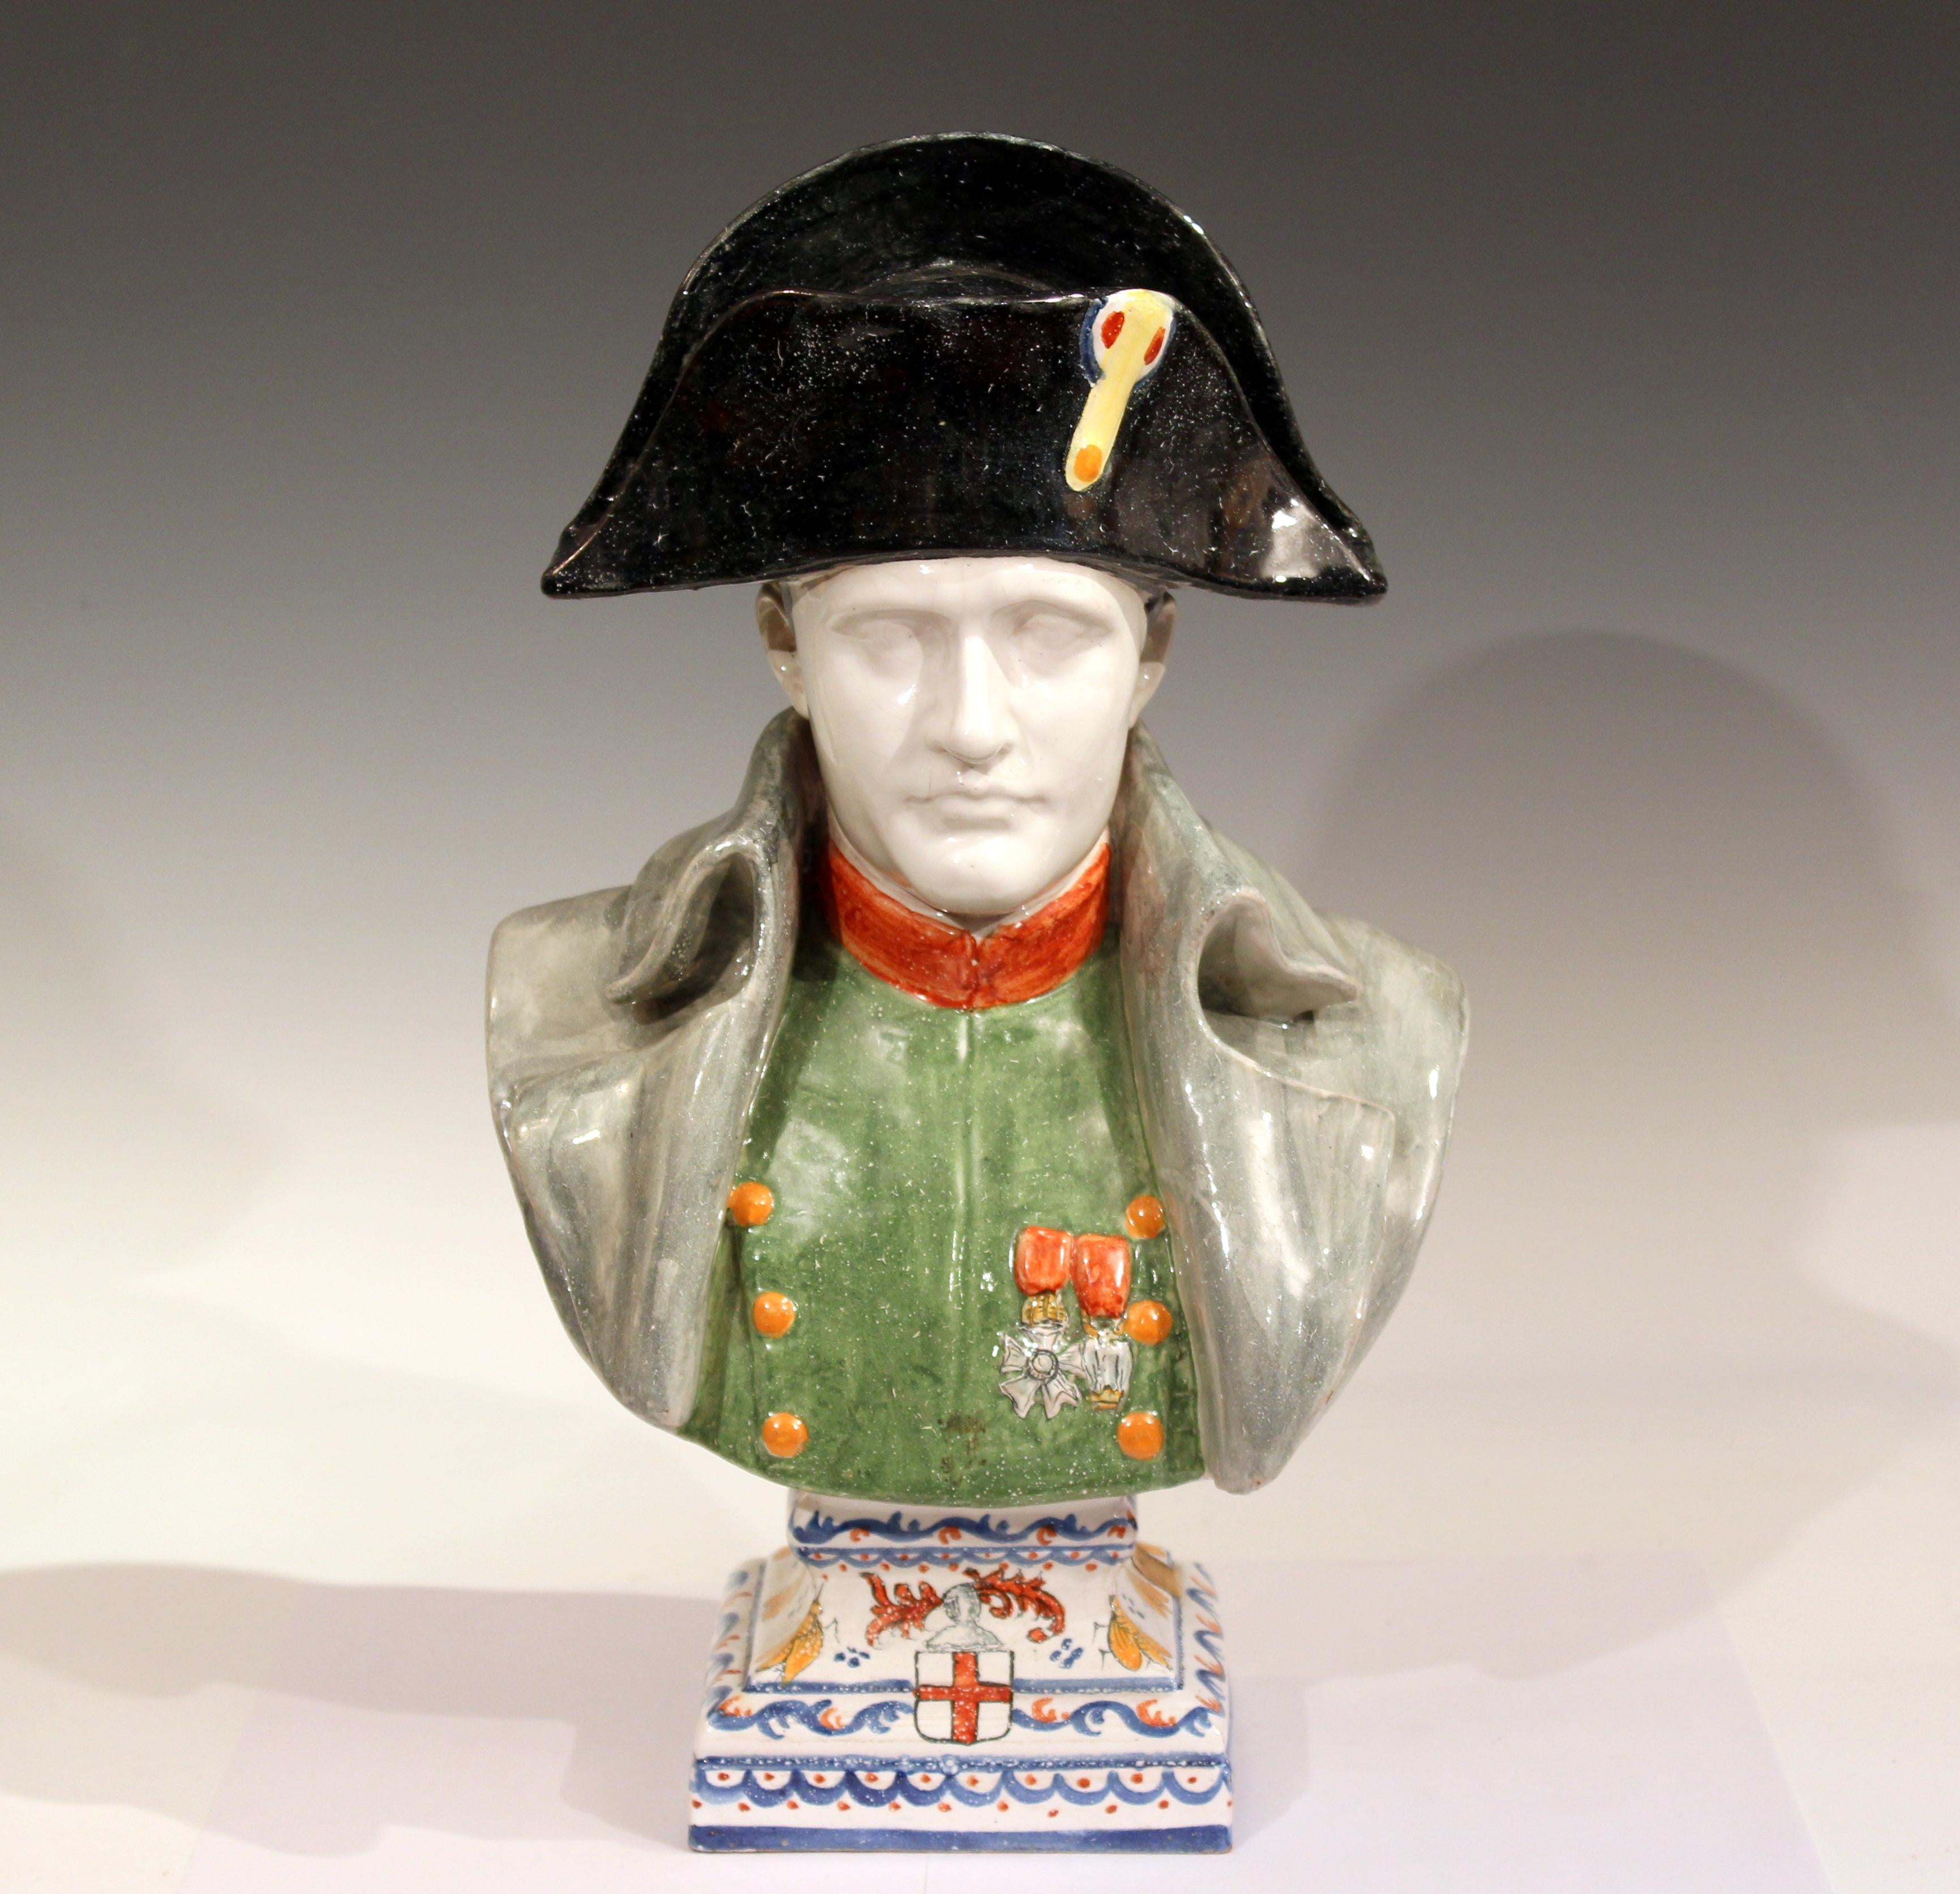 Large antique French faience pottery bust of Napoleon Bonaparte by Alcide Chaumeil, circa late 19th century. Depicting Napoleon in a black hat with gray overcoat over a green uniform with two medals at the breast. The base decorated with a heraldic